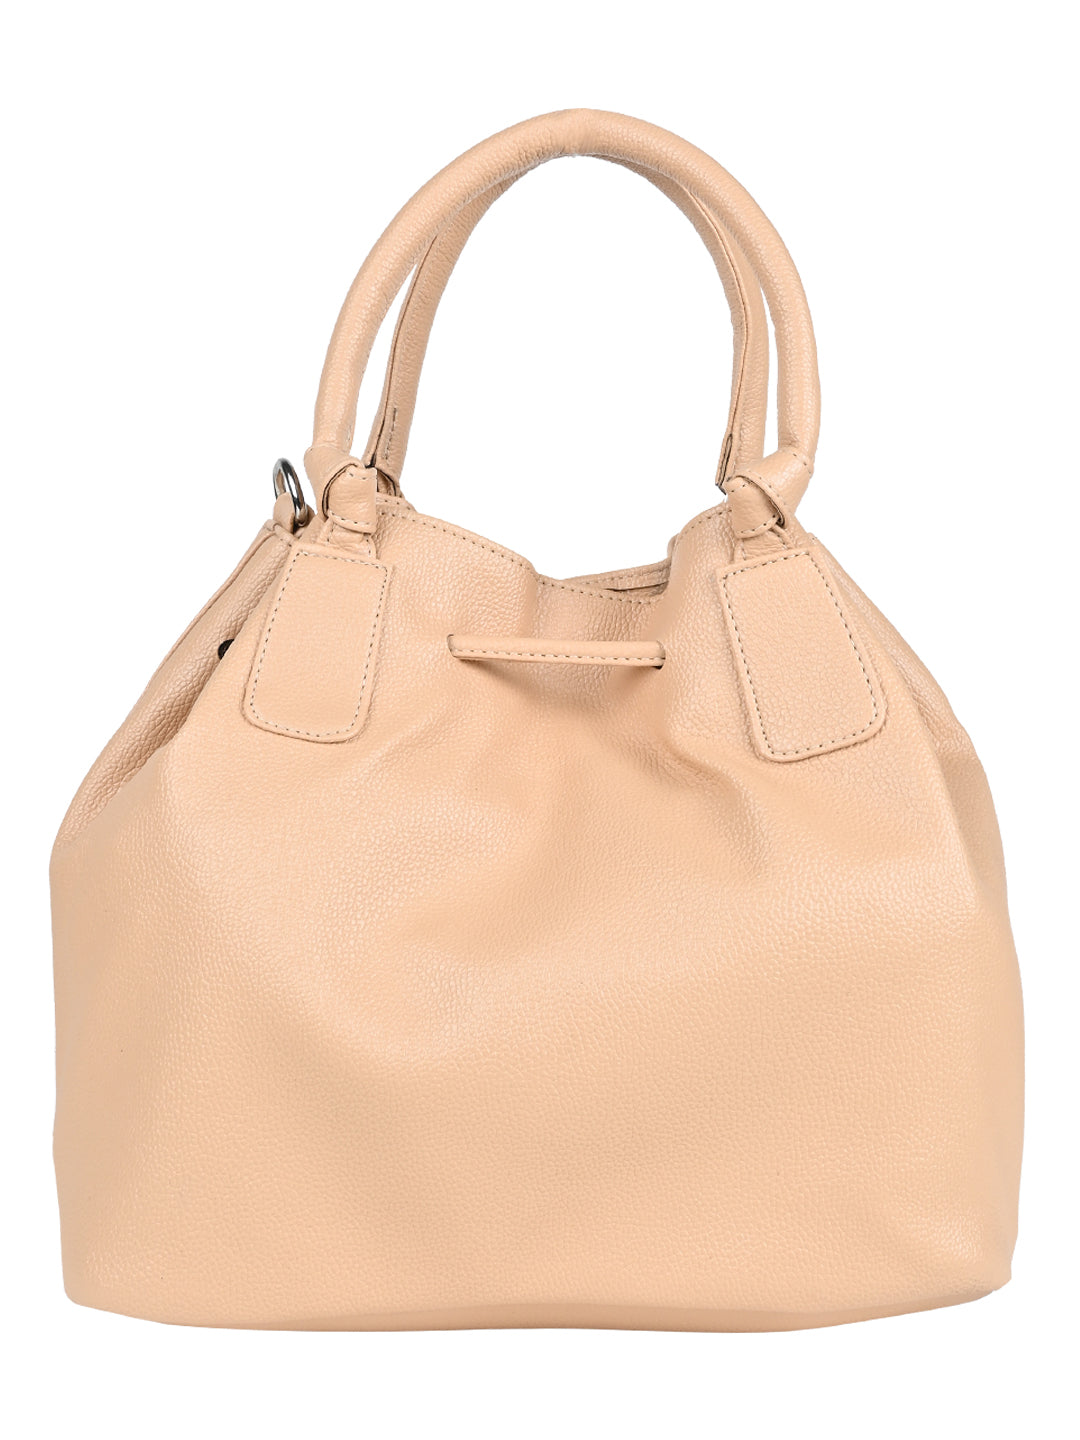 It is a perfect handbag for a casual day out. 